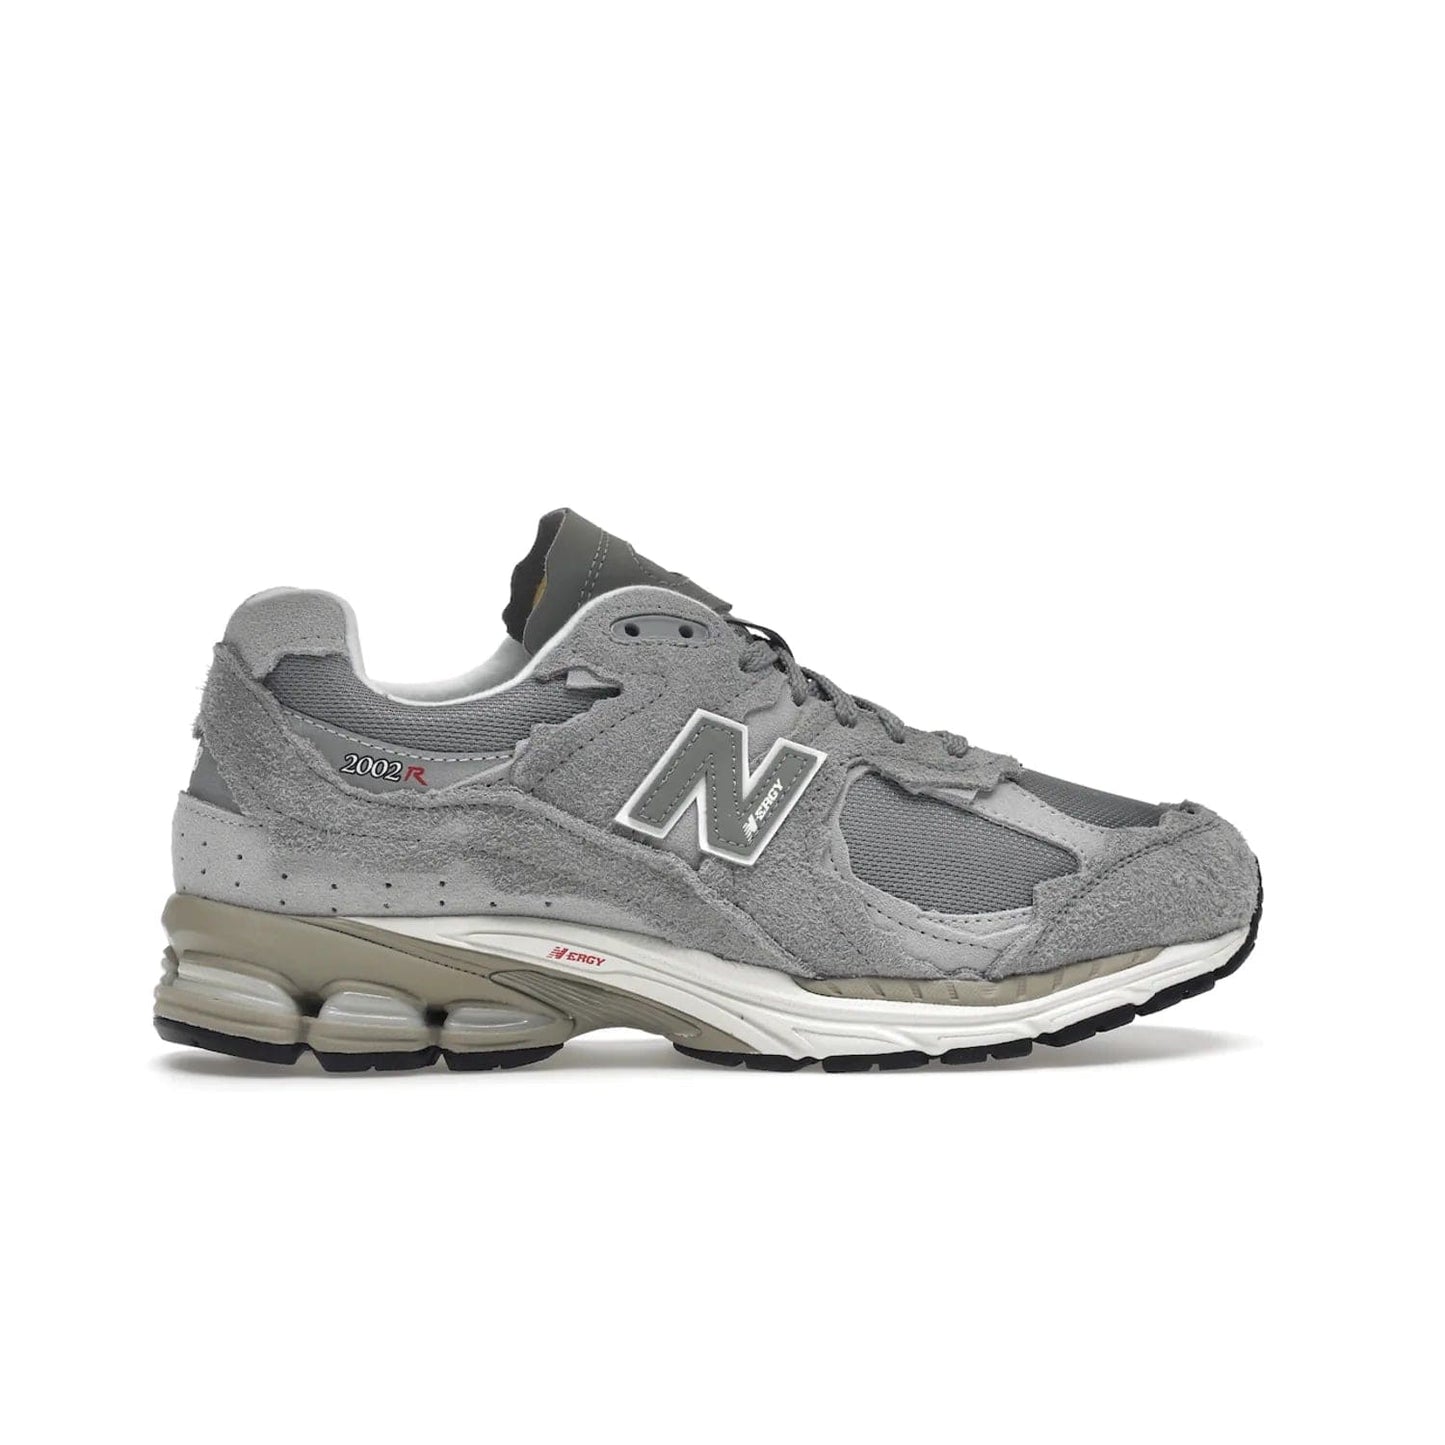 New Balance 2002R Protection Pack Grey - Image 36 - Only at www.BallersClubKickz.com - The New Balance 2002R Protection Pack Grey provides superior protection and all-day comfort. It features a blend of synthetic and mesh materials, foam midsole, rubber outsole, and a toe cap and heel counter. Show off the classic "N" logo and "2002R" lettering. Get a pair on February 14, 2023 for protection and style.